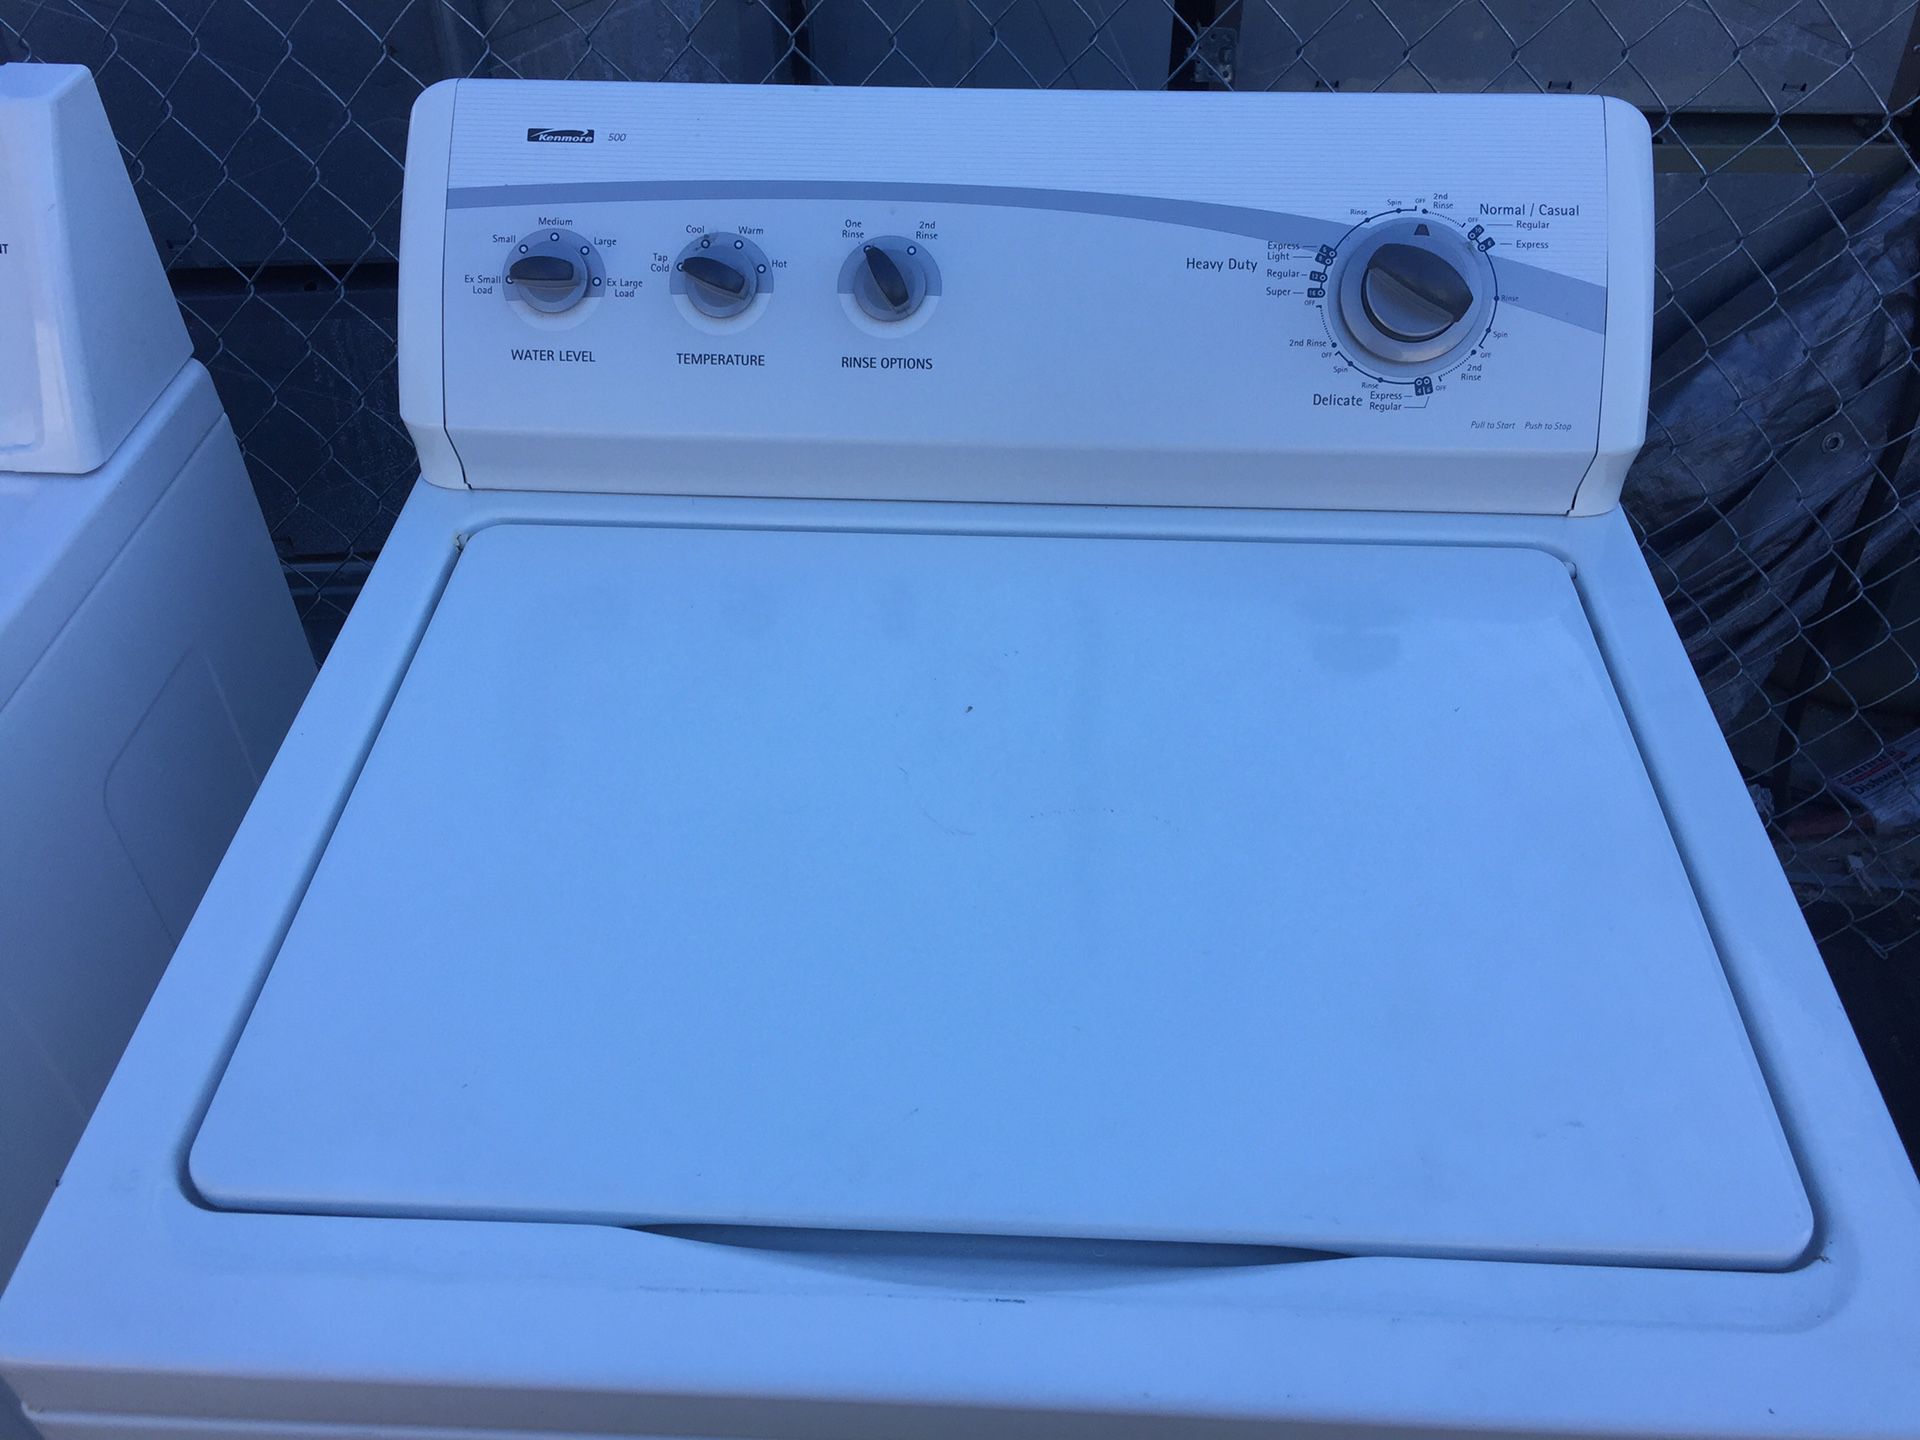 Kenmore top load washer